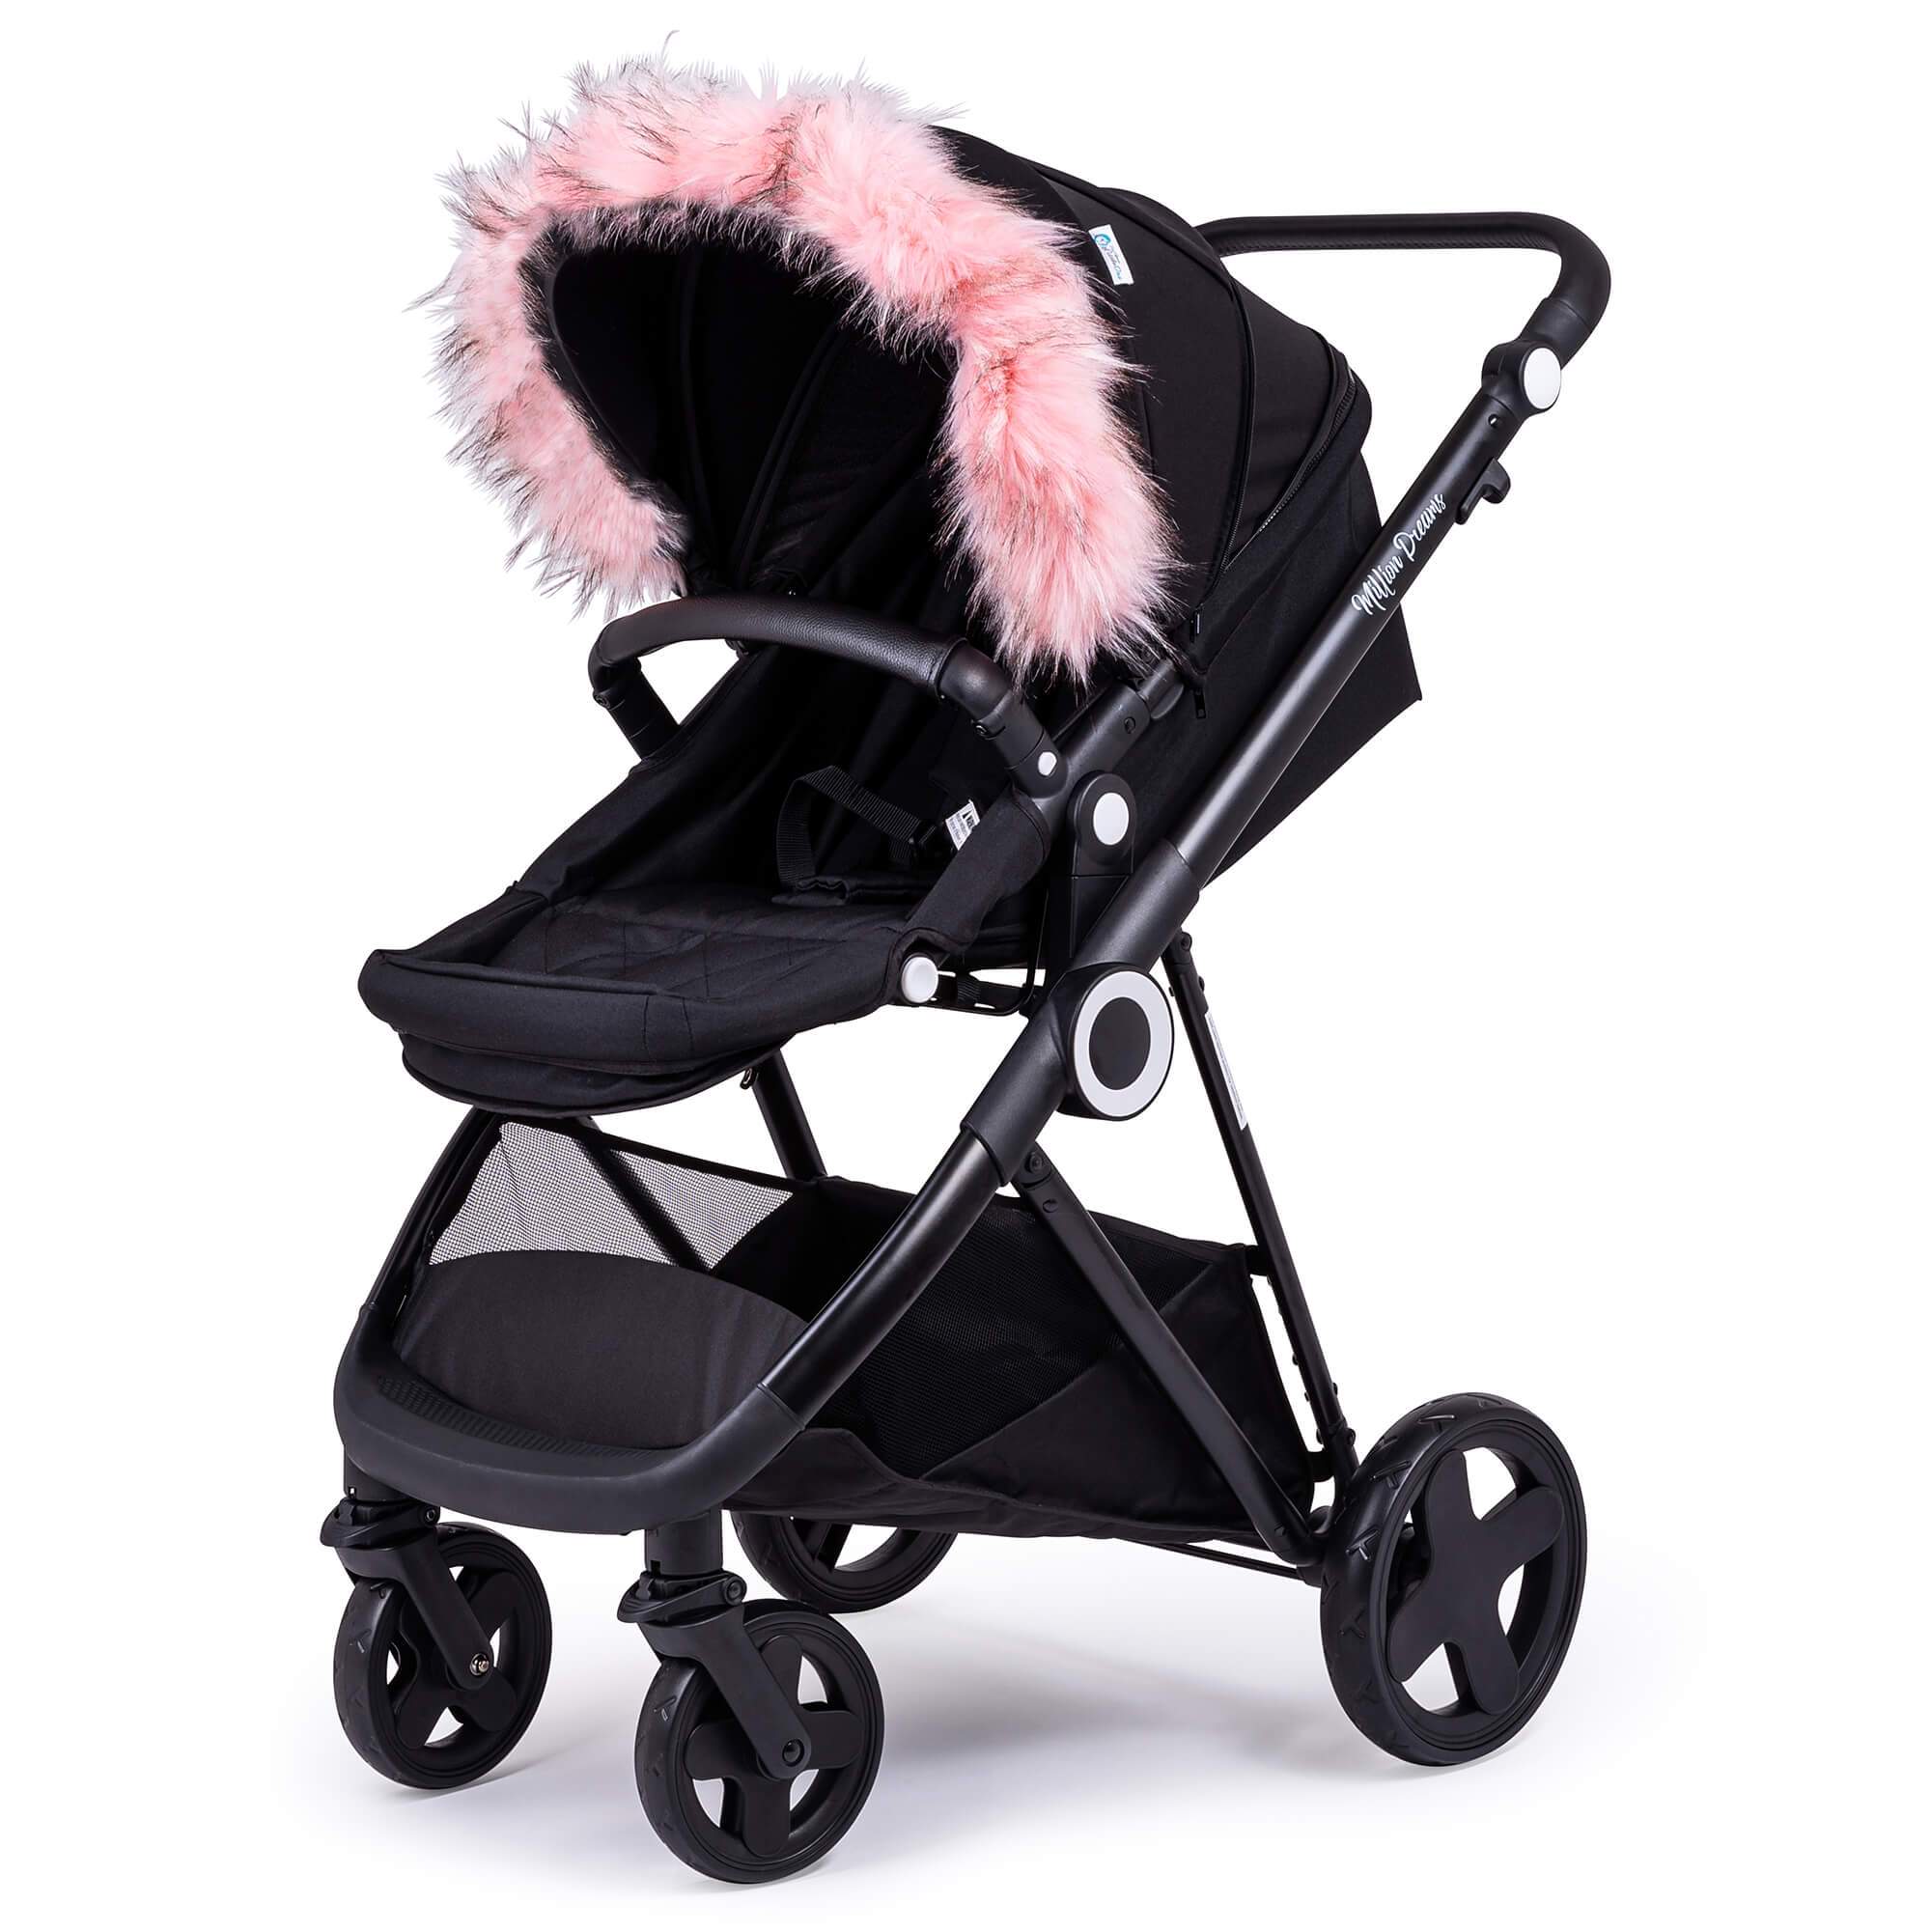 Pram Fur Hood Trim Attachment for Pushchair Compatible with Stokke - Light Pink / Fits All Models | For Your Little One